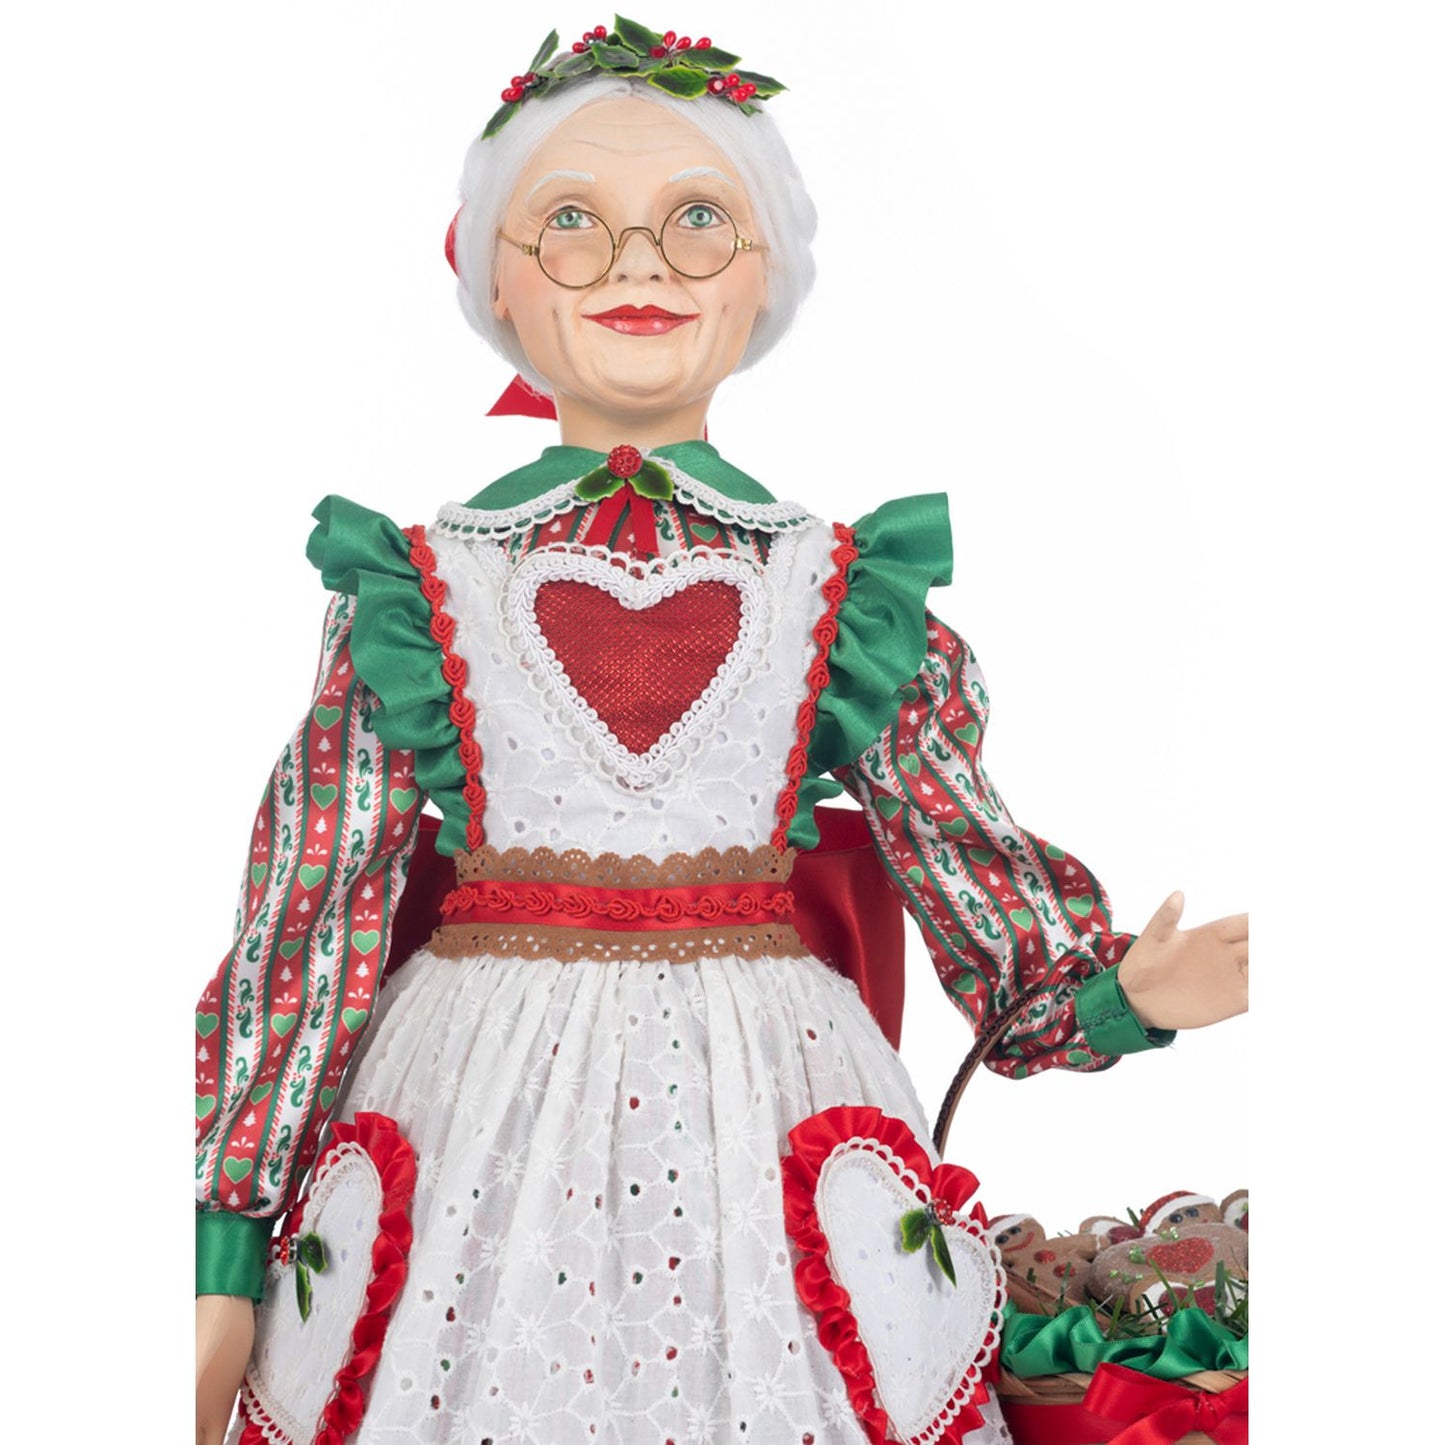 Katherine's Collection Seasoned Greetings Mama Maple Nutmeg Doll 32-Inch, Green/White